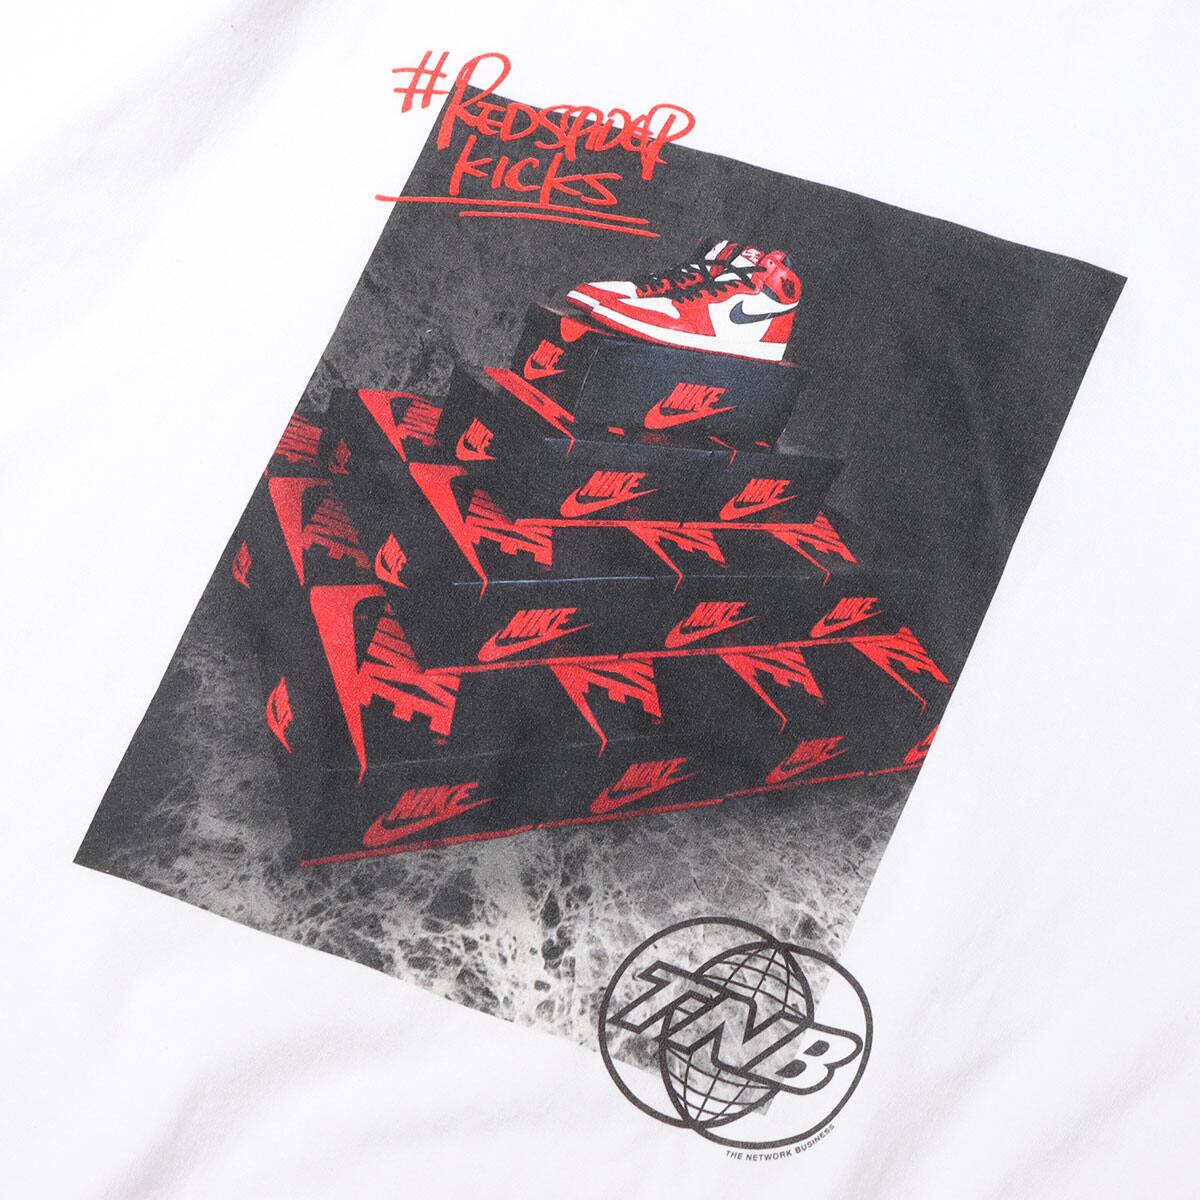 THE NETWORK BUSINESS x RED SPIDER KICKS SNEAKER TOWER TEE WHITE 22SU-I